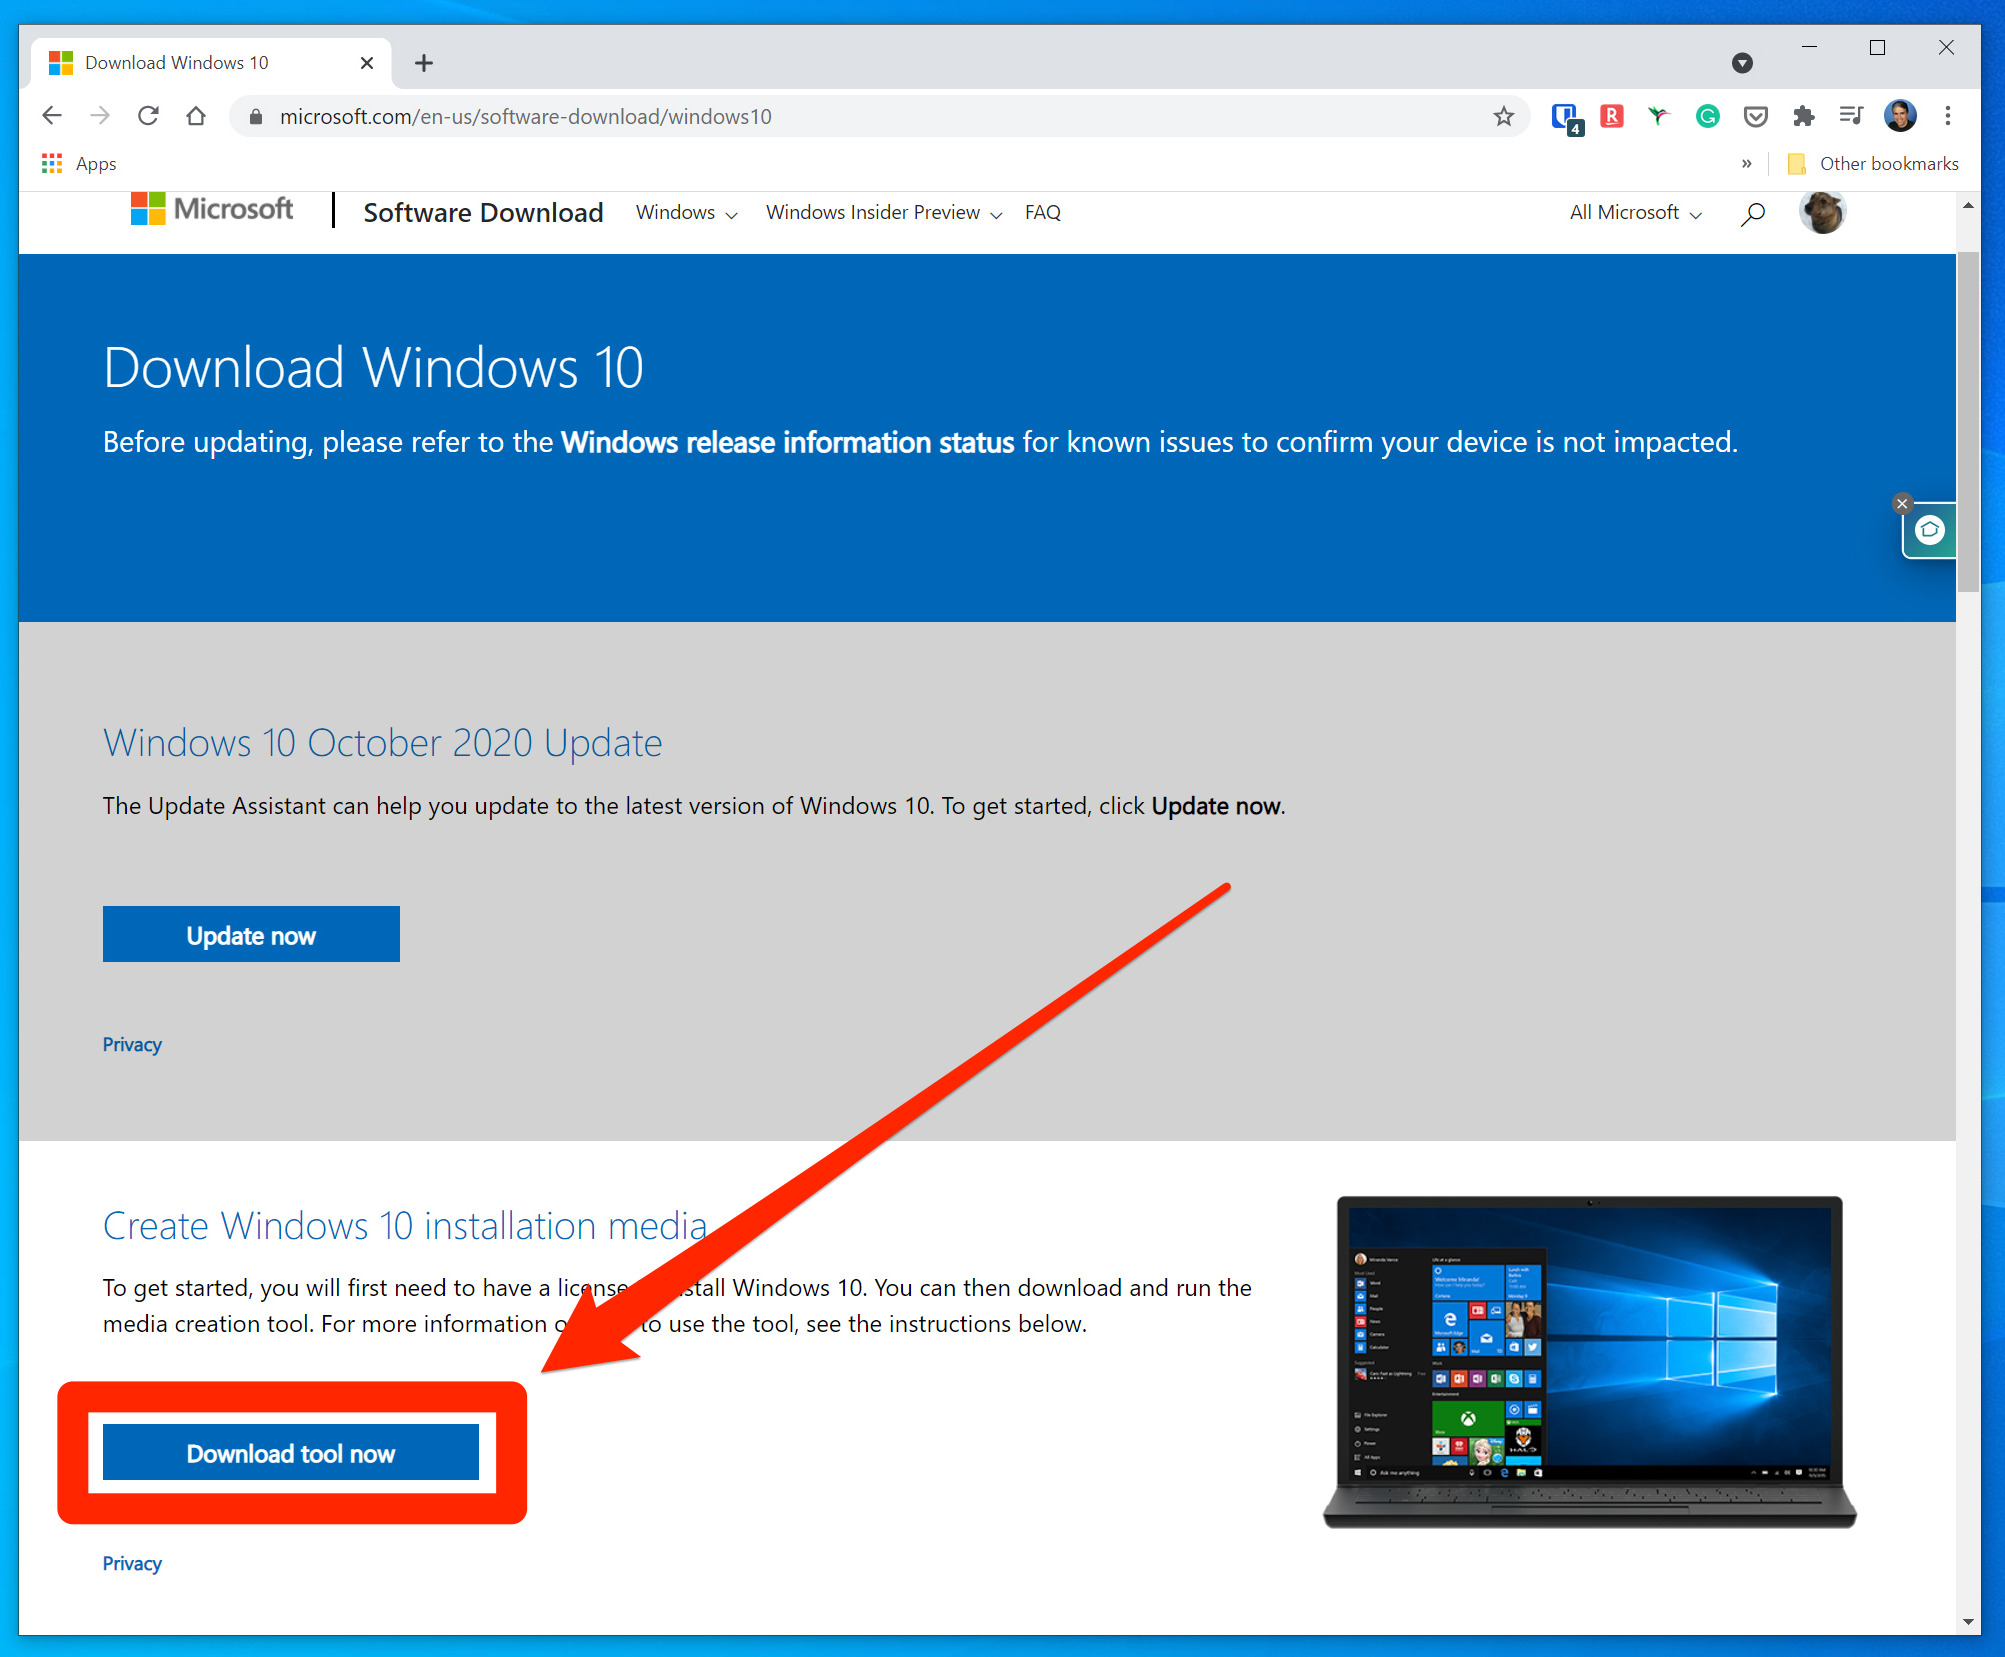 Does installing Windows 10 cost money?